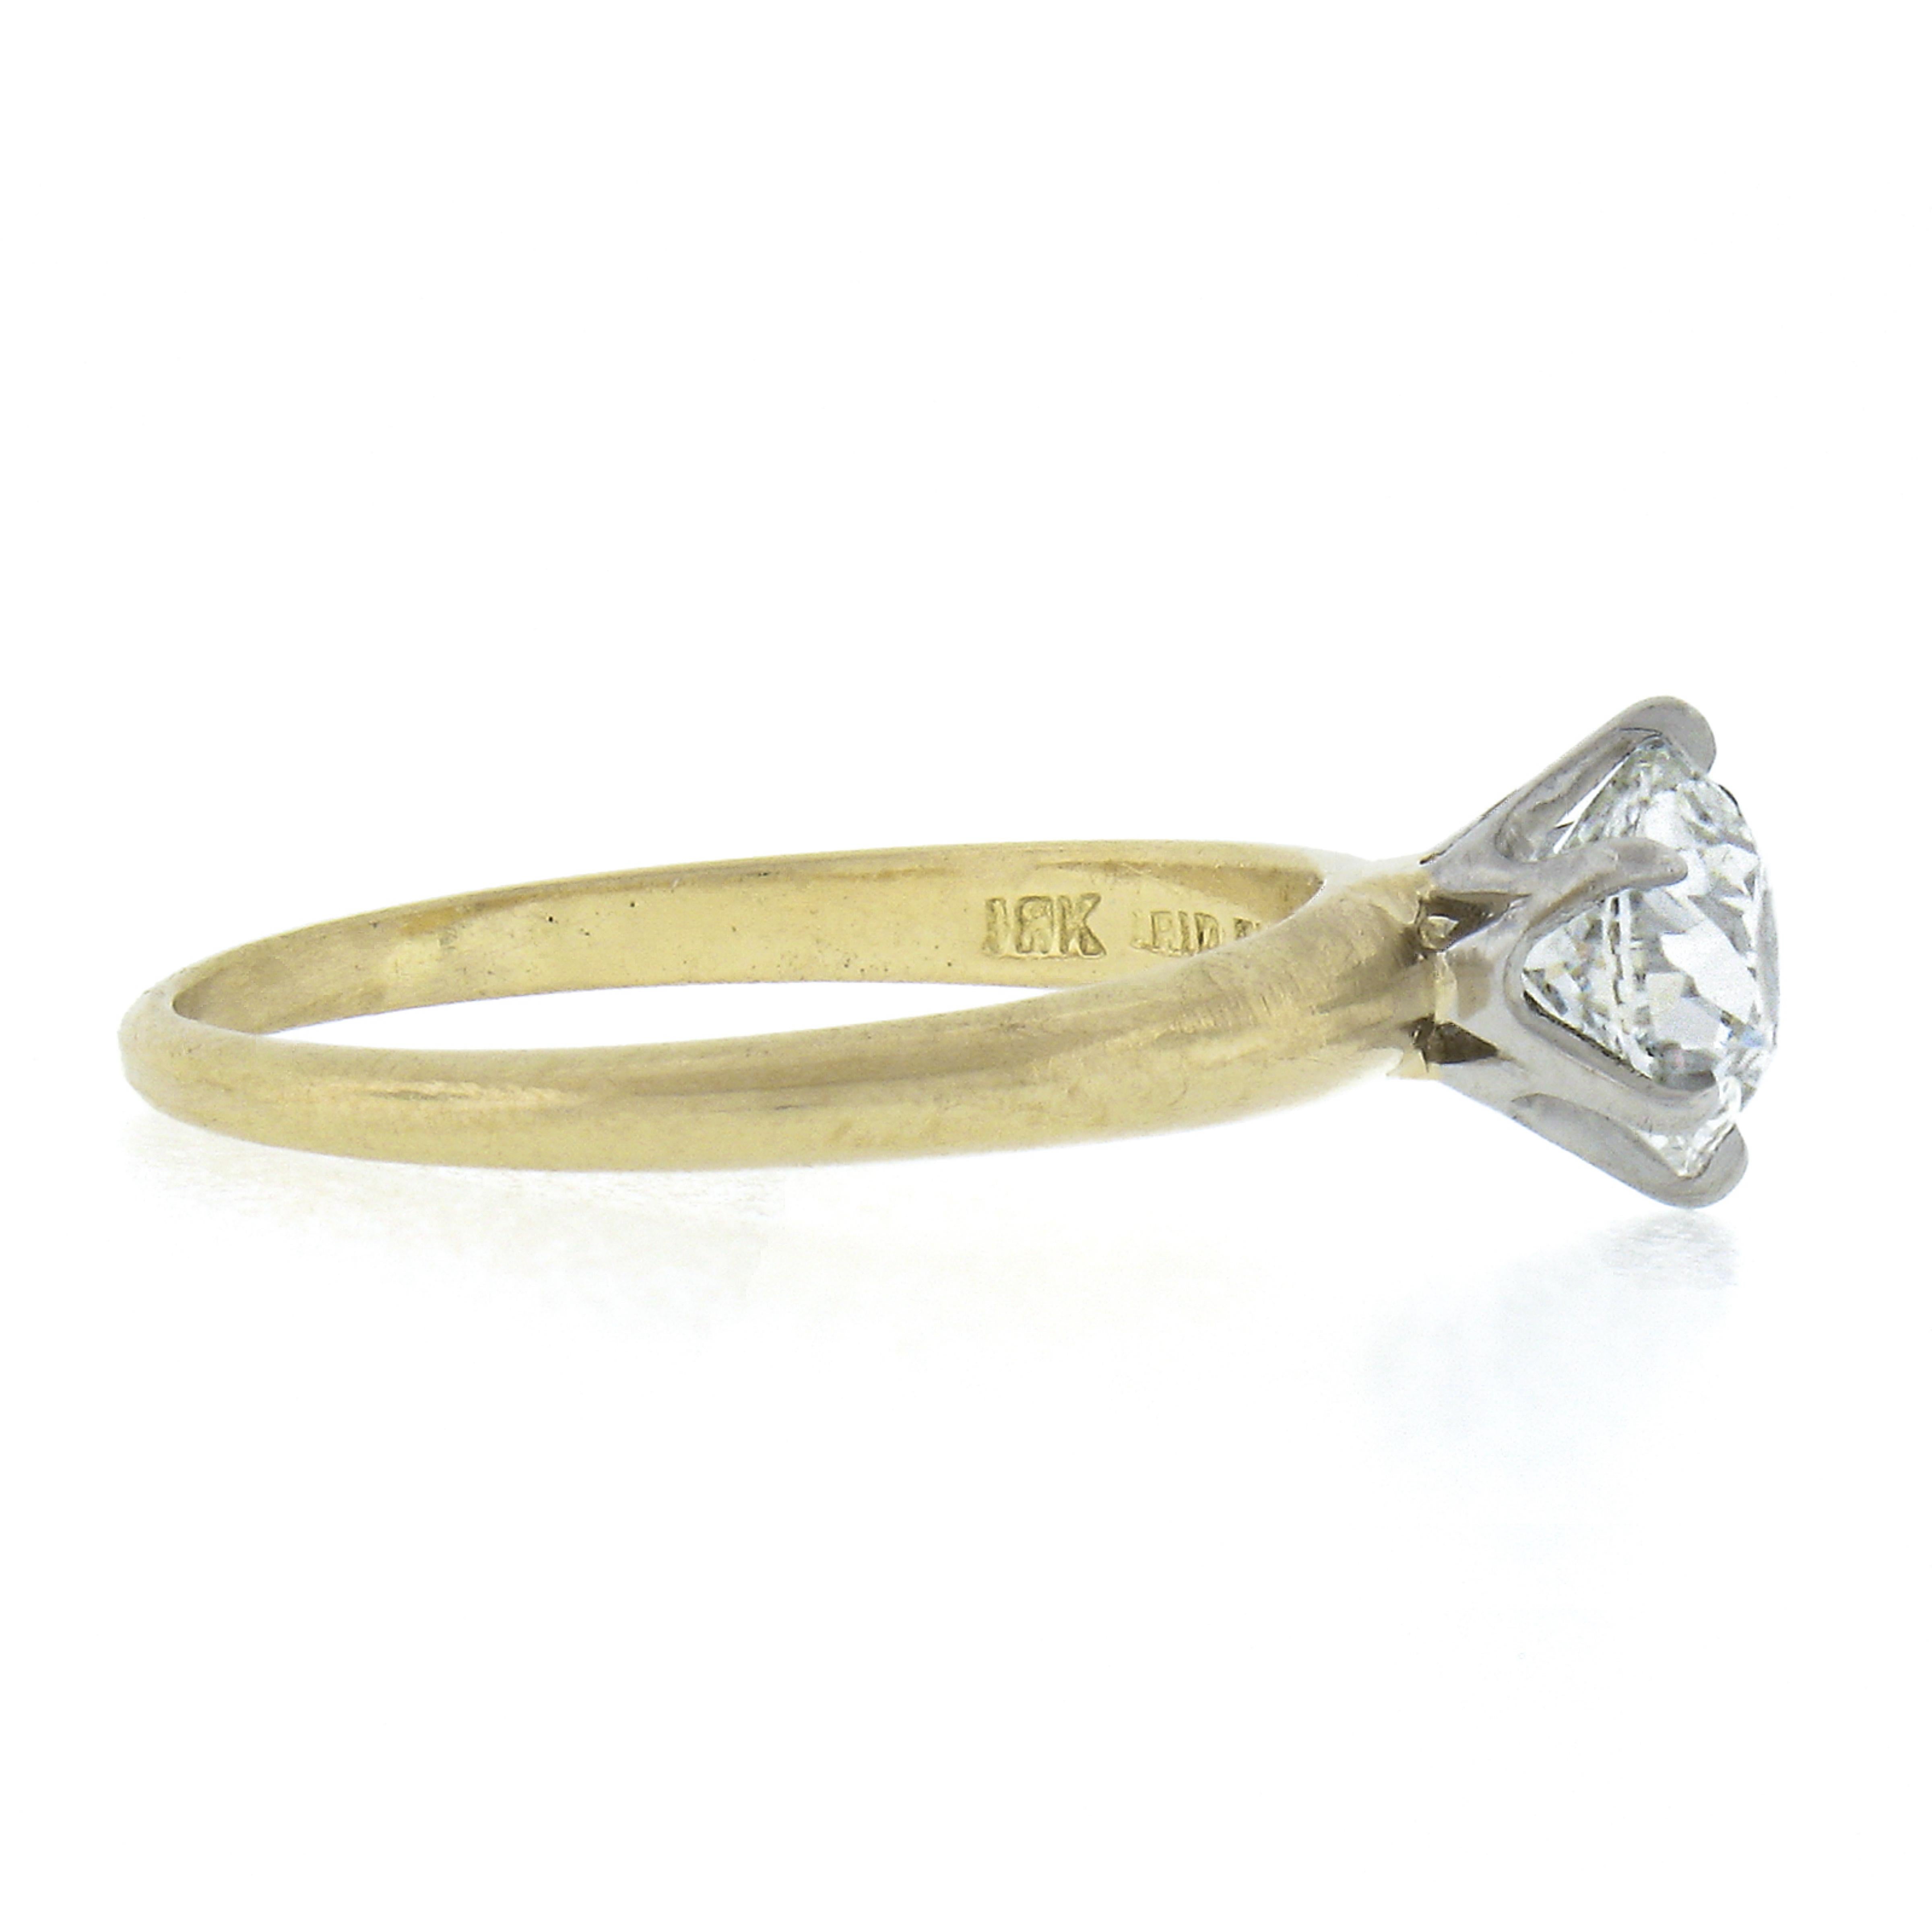 Old European Cut Tiffany & Co. 18K Gold & Platinum GIA 0.88ct Diamond Solitaire Engagement Ring